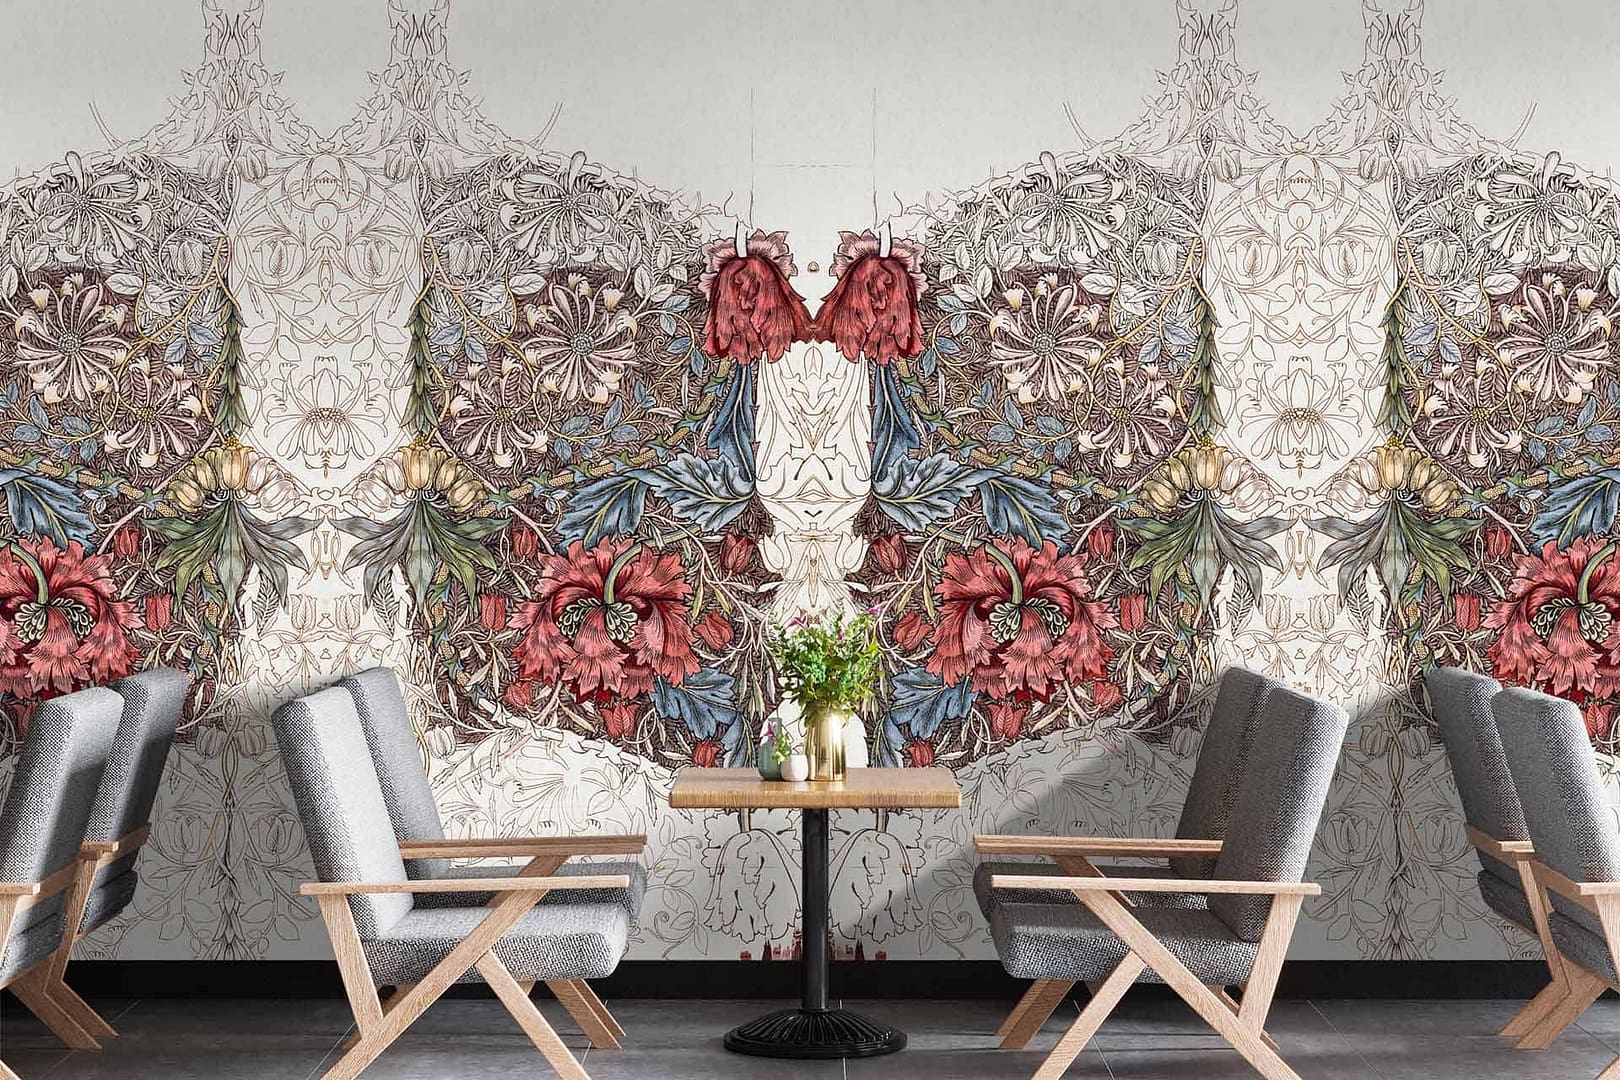 Matinee - a wallpaper made up of a vintage floral images, flowers are emerging from ornate pattern by Cara Saven Wall Design